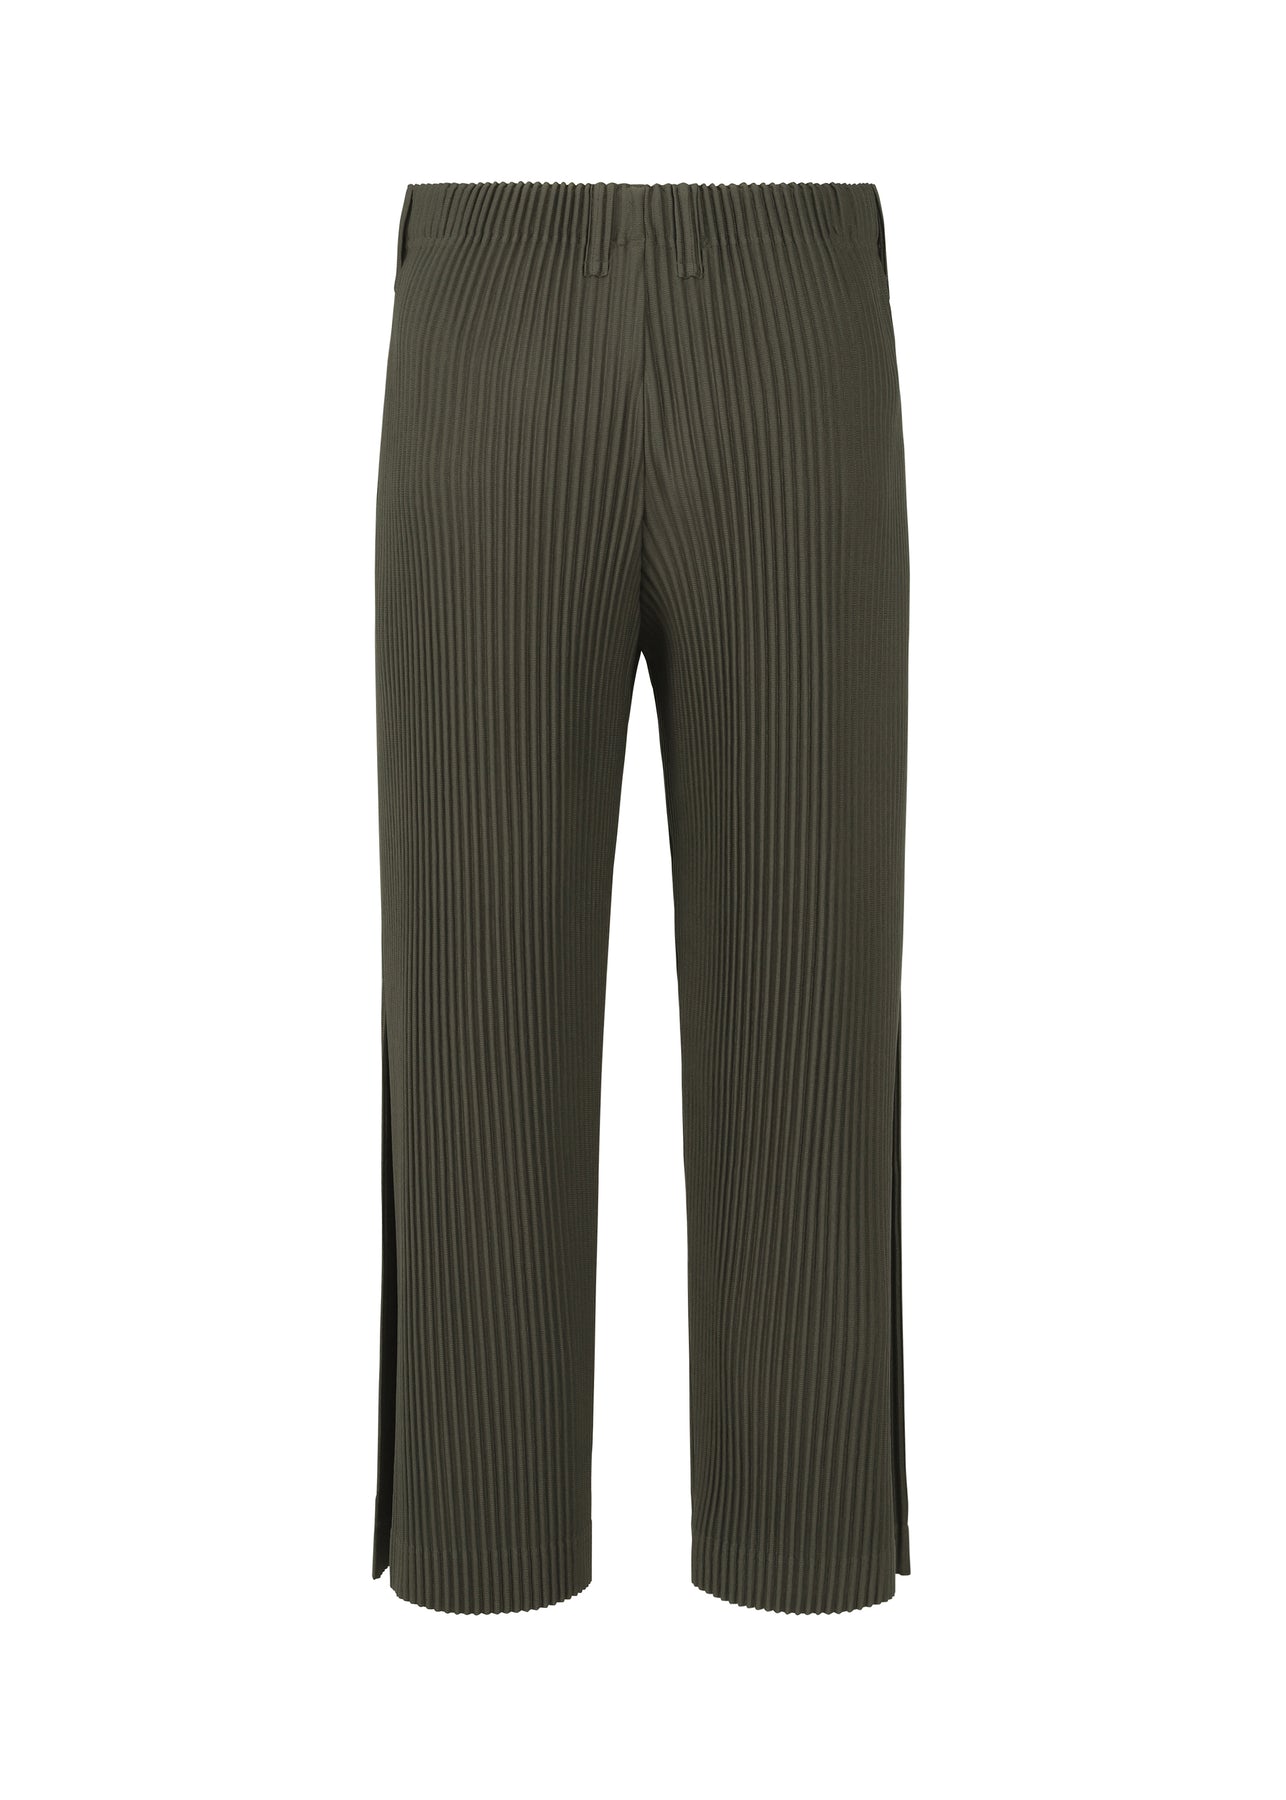 need help legit checking this pleats please issey miyake cropped trousers.  kinda feeling sus about it. thanks everyone! : r/japanesestreetwear